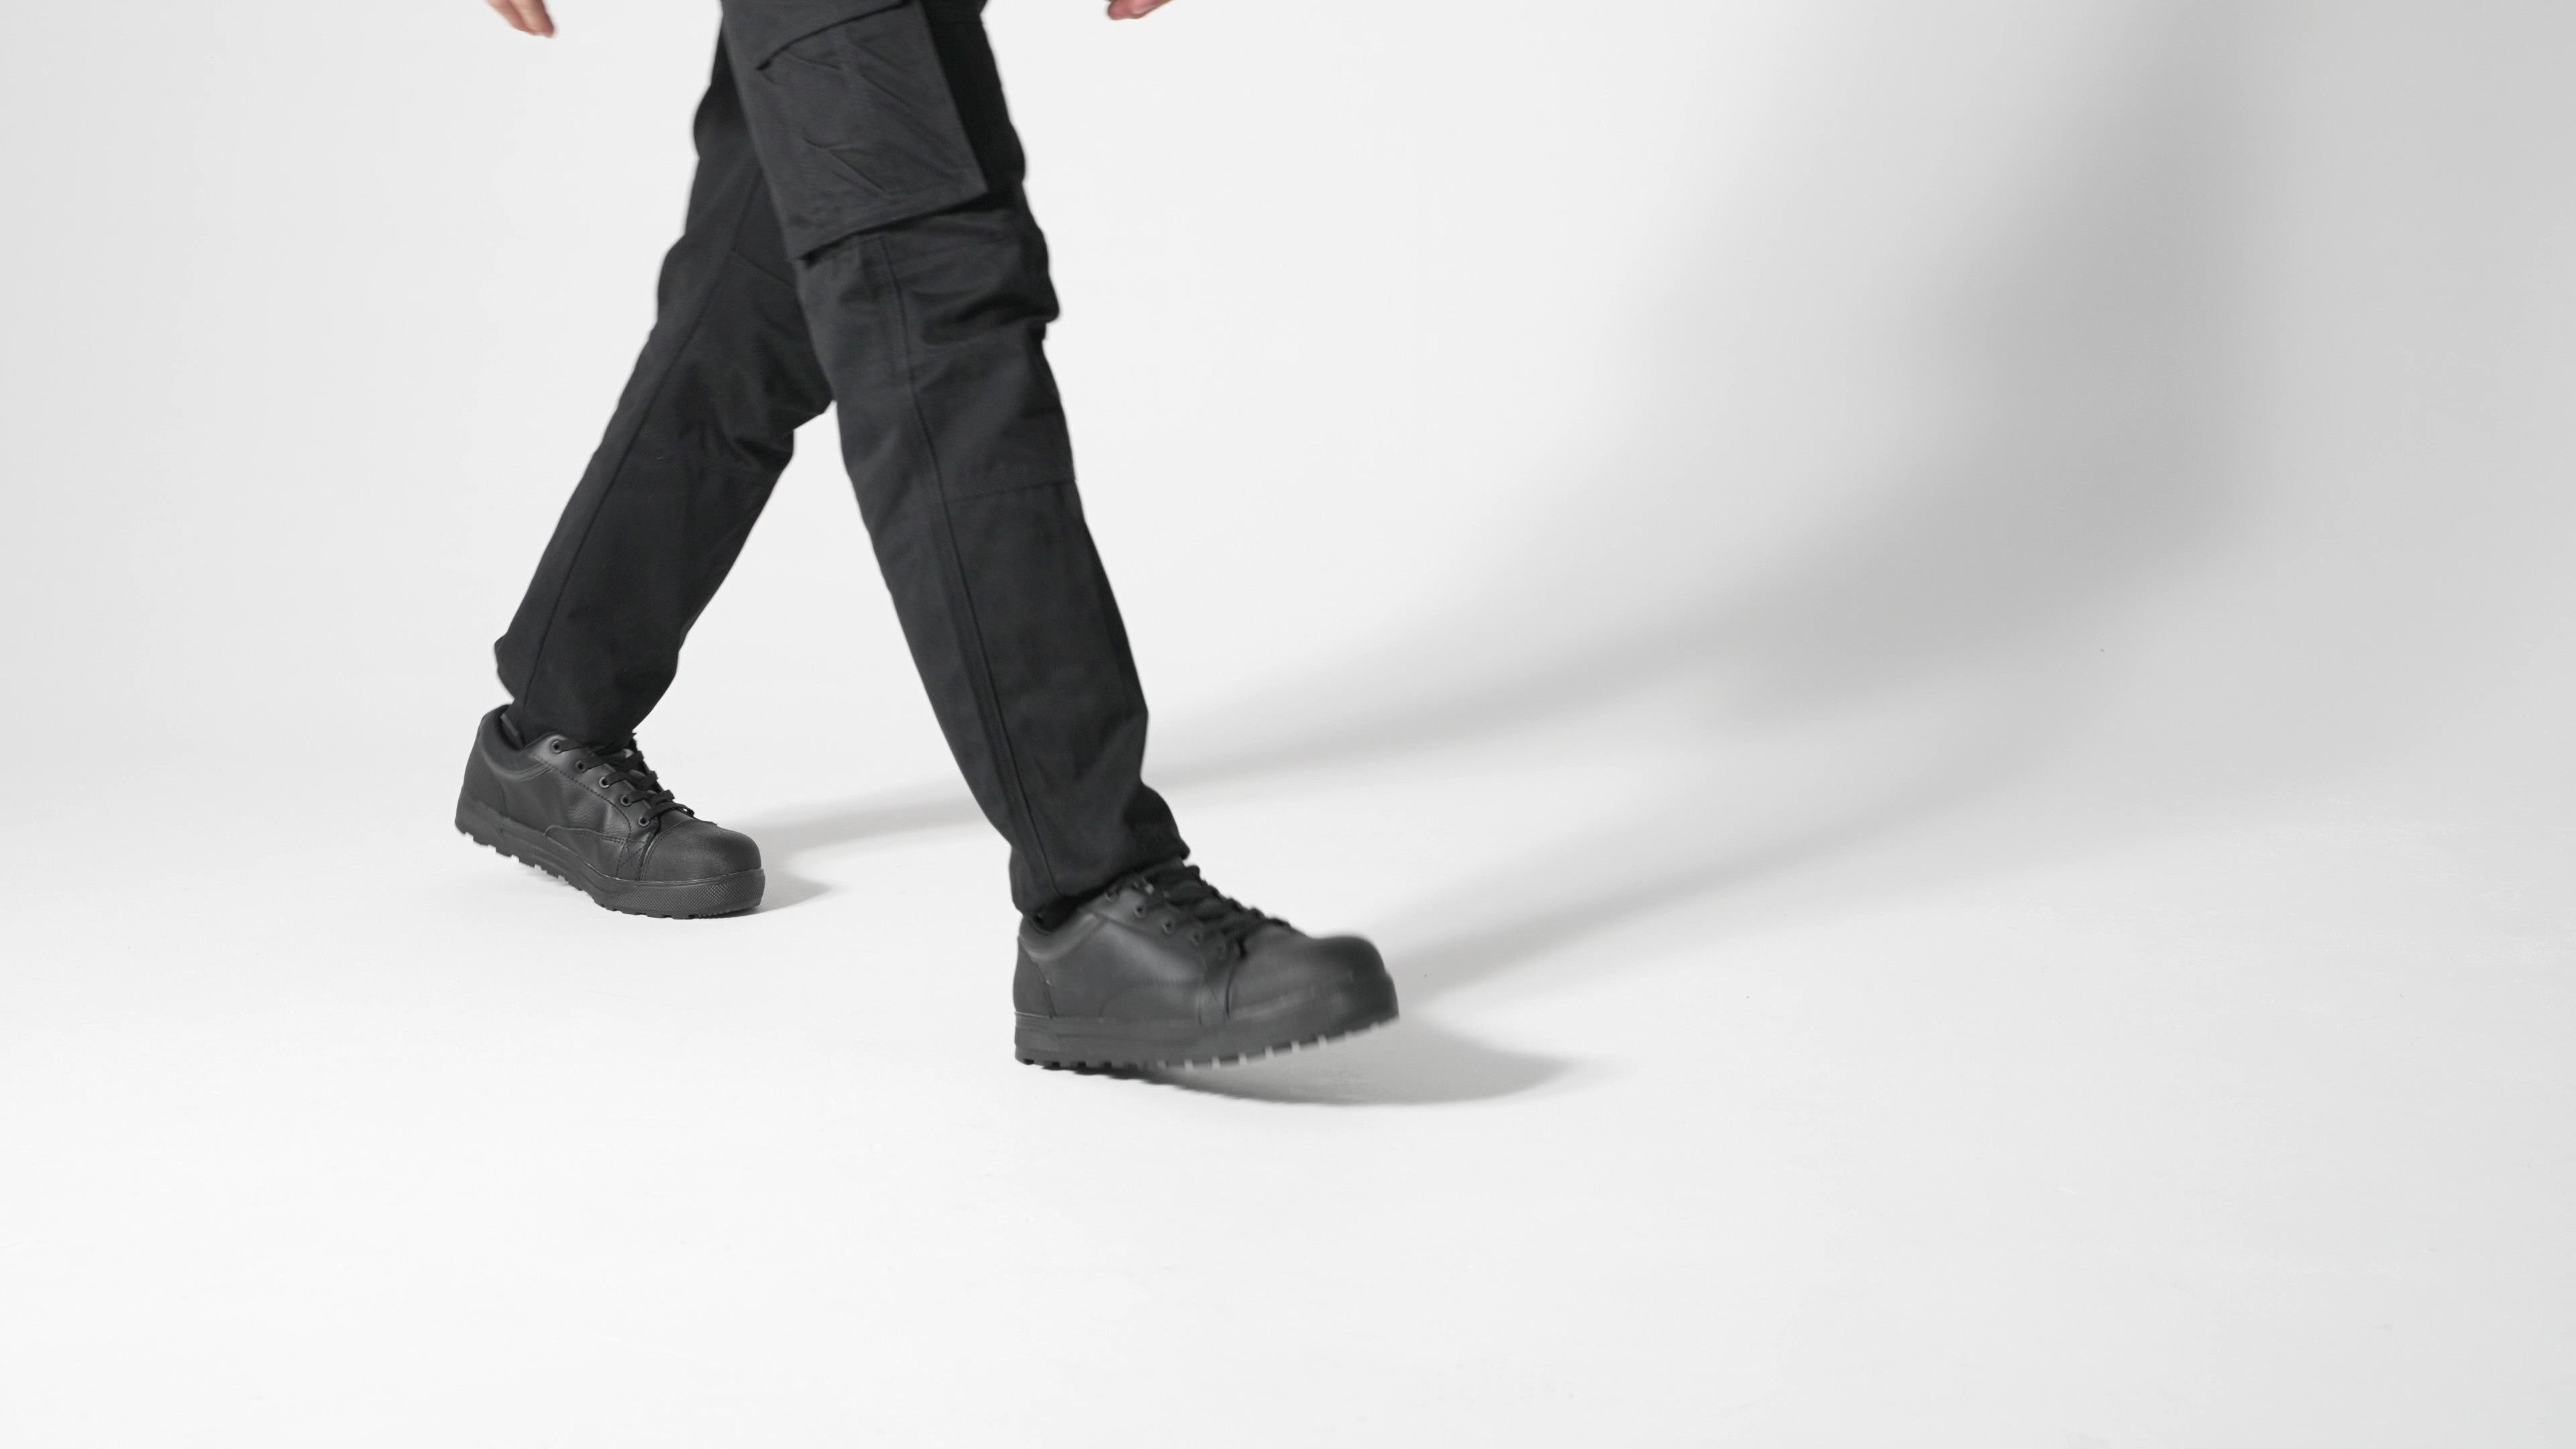 The Fergus Black from Shoes For Crews is an slip-resistant safety shoe with a waterproof leather upper and a nanocomposite toe cap (200 joules), product video.